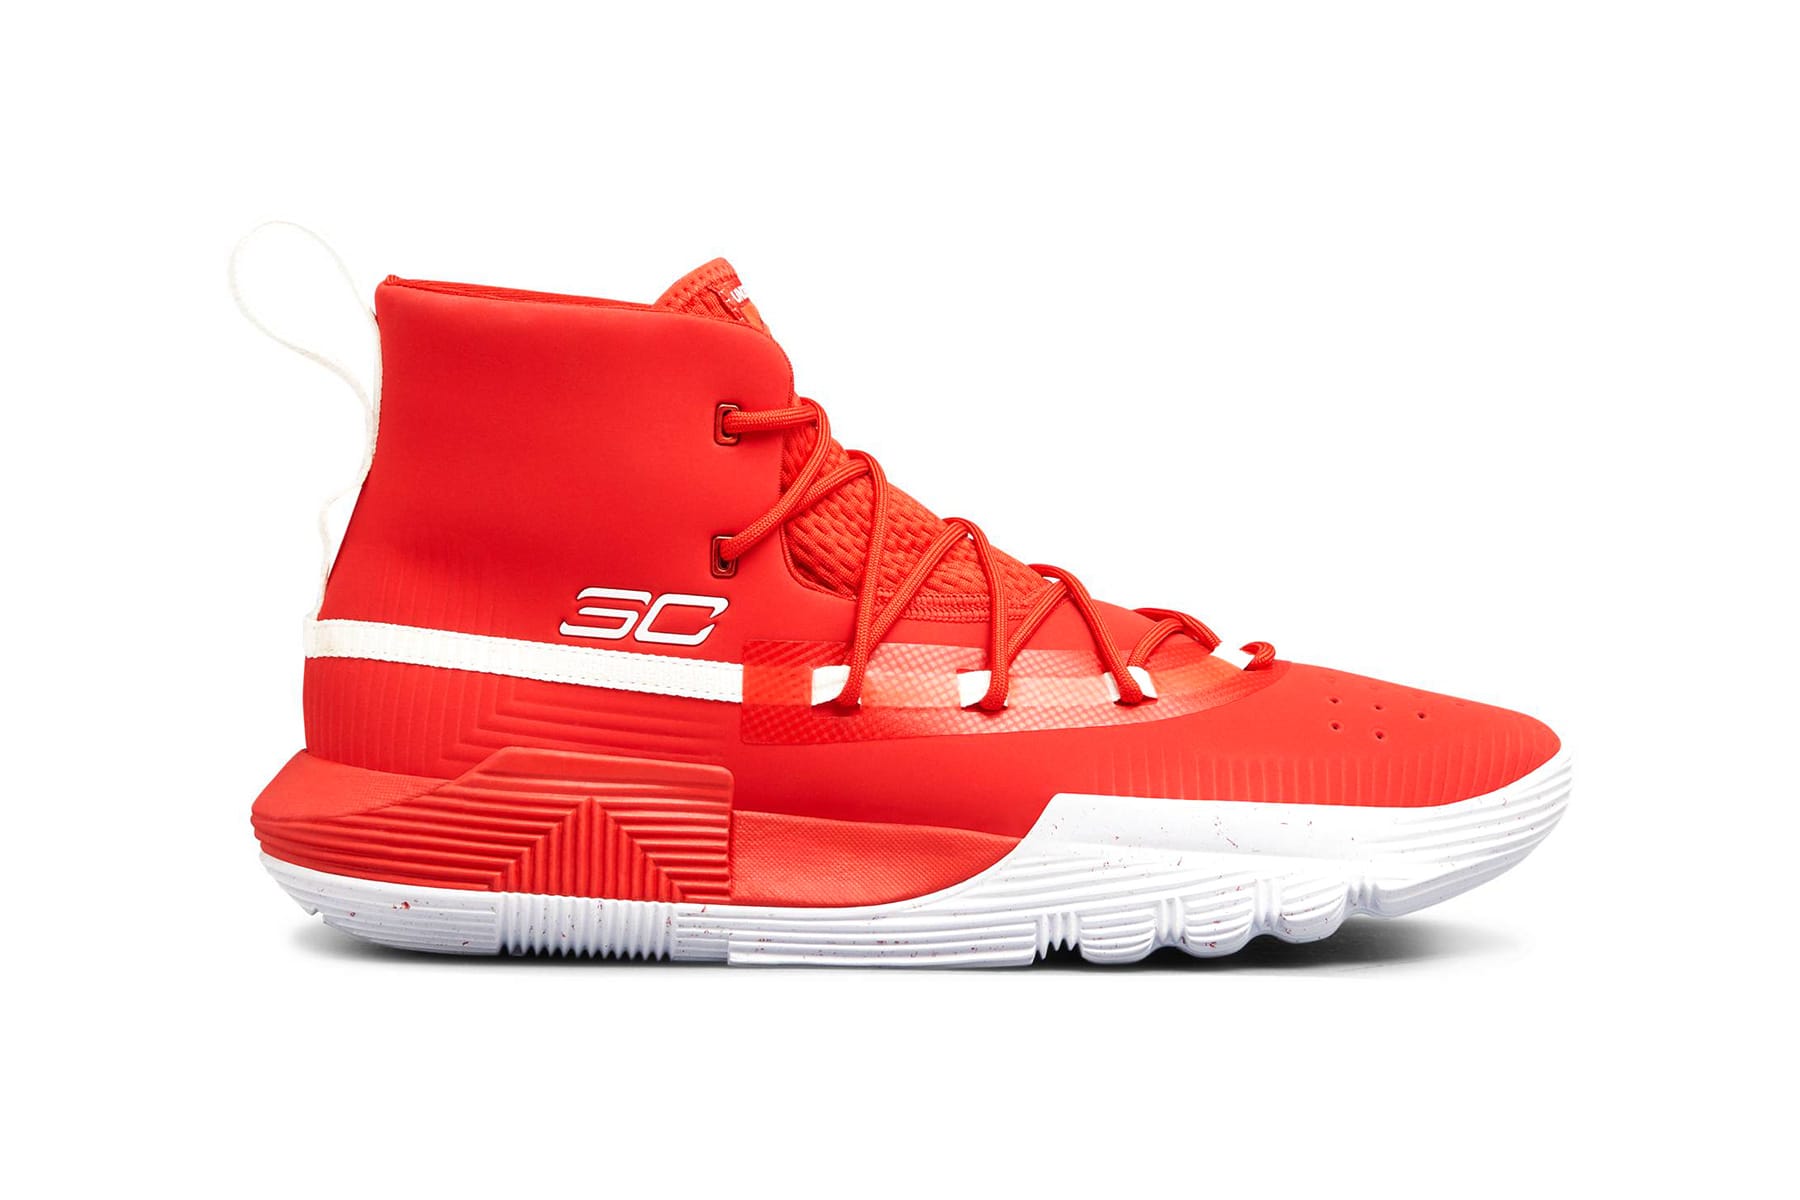 steph curry 3zero 2 Online Shopping for 